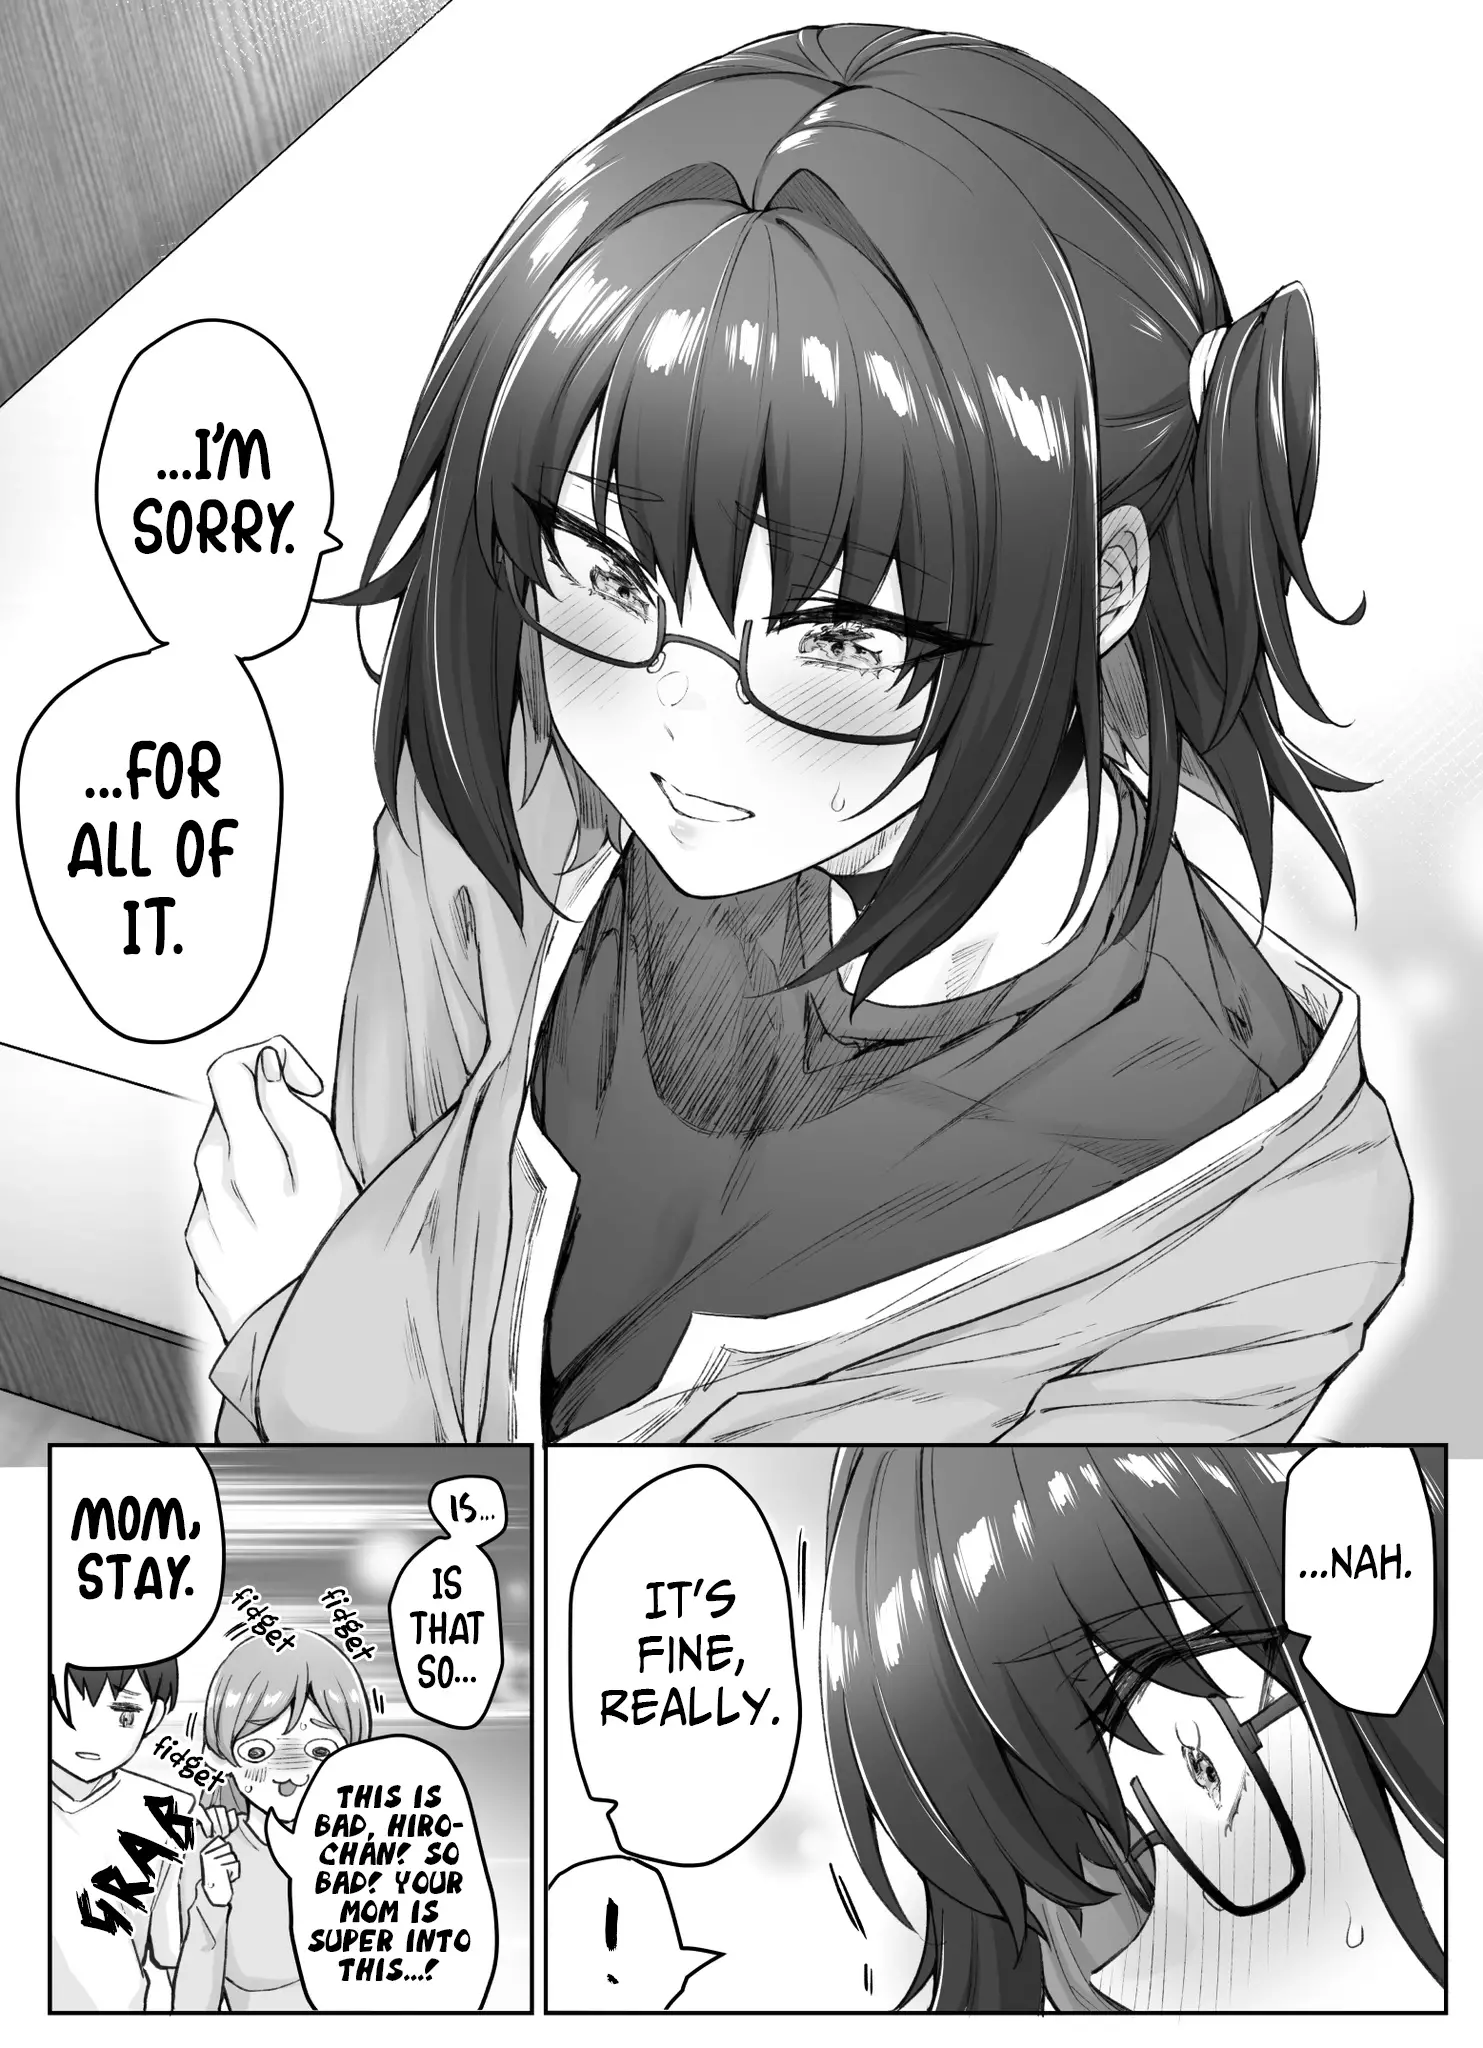 The Tsuntsuntsuntsuntsuntsun Tsuntsuntsuntsuntsundere Girl Getting Less And Less Tsun Day By Day - 44 page 2-85a1cfe7